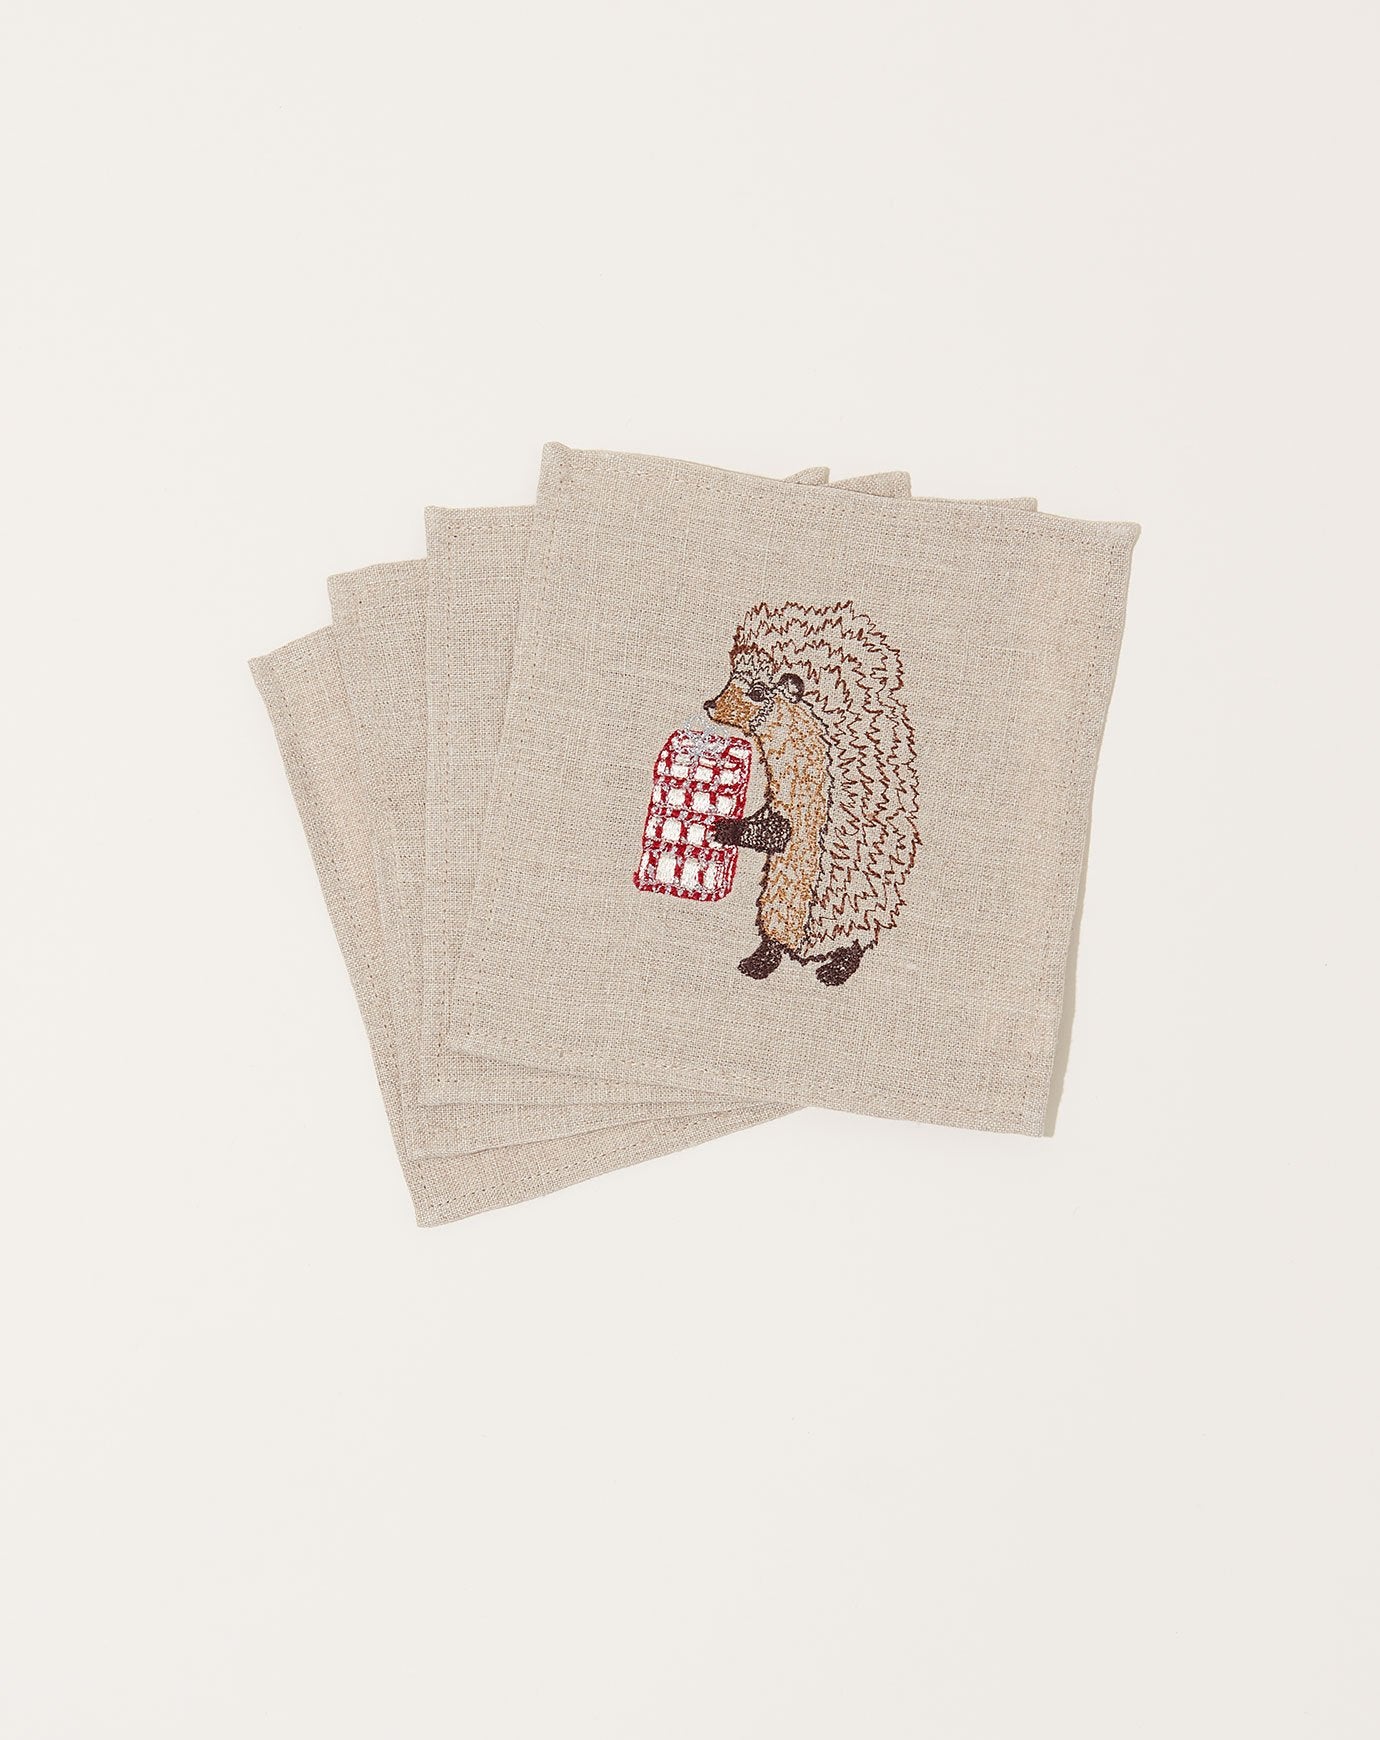 Coral & Tusk Woodland Friends with Presents Cocktail Napkin Set